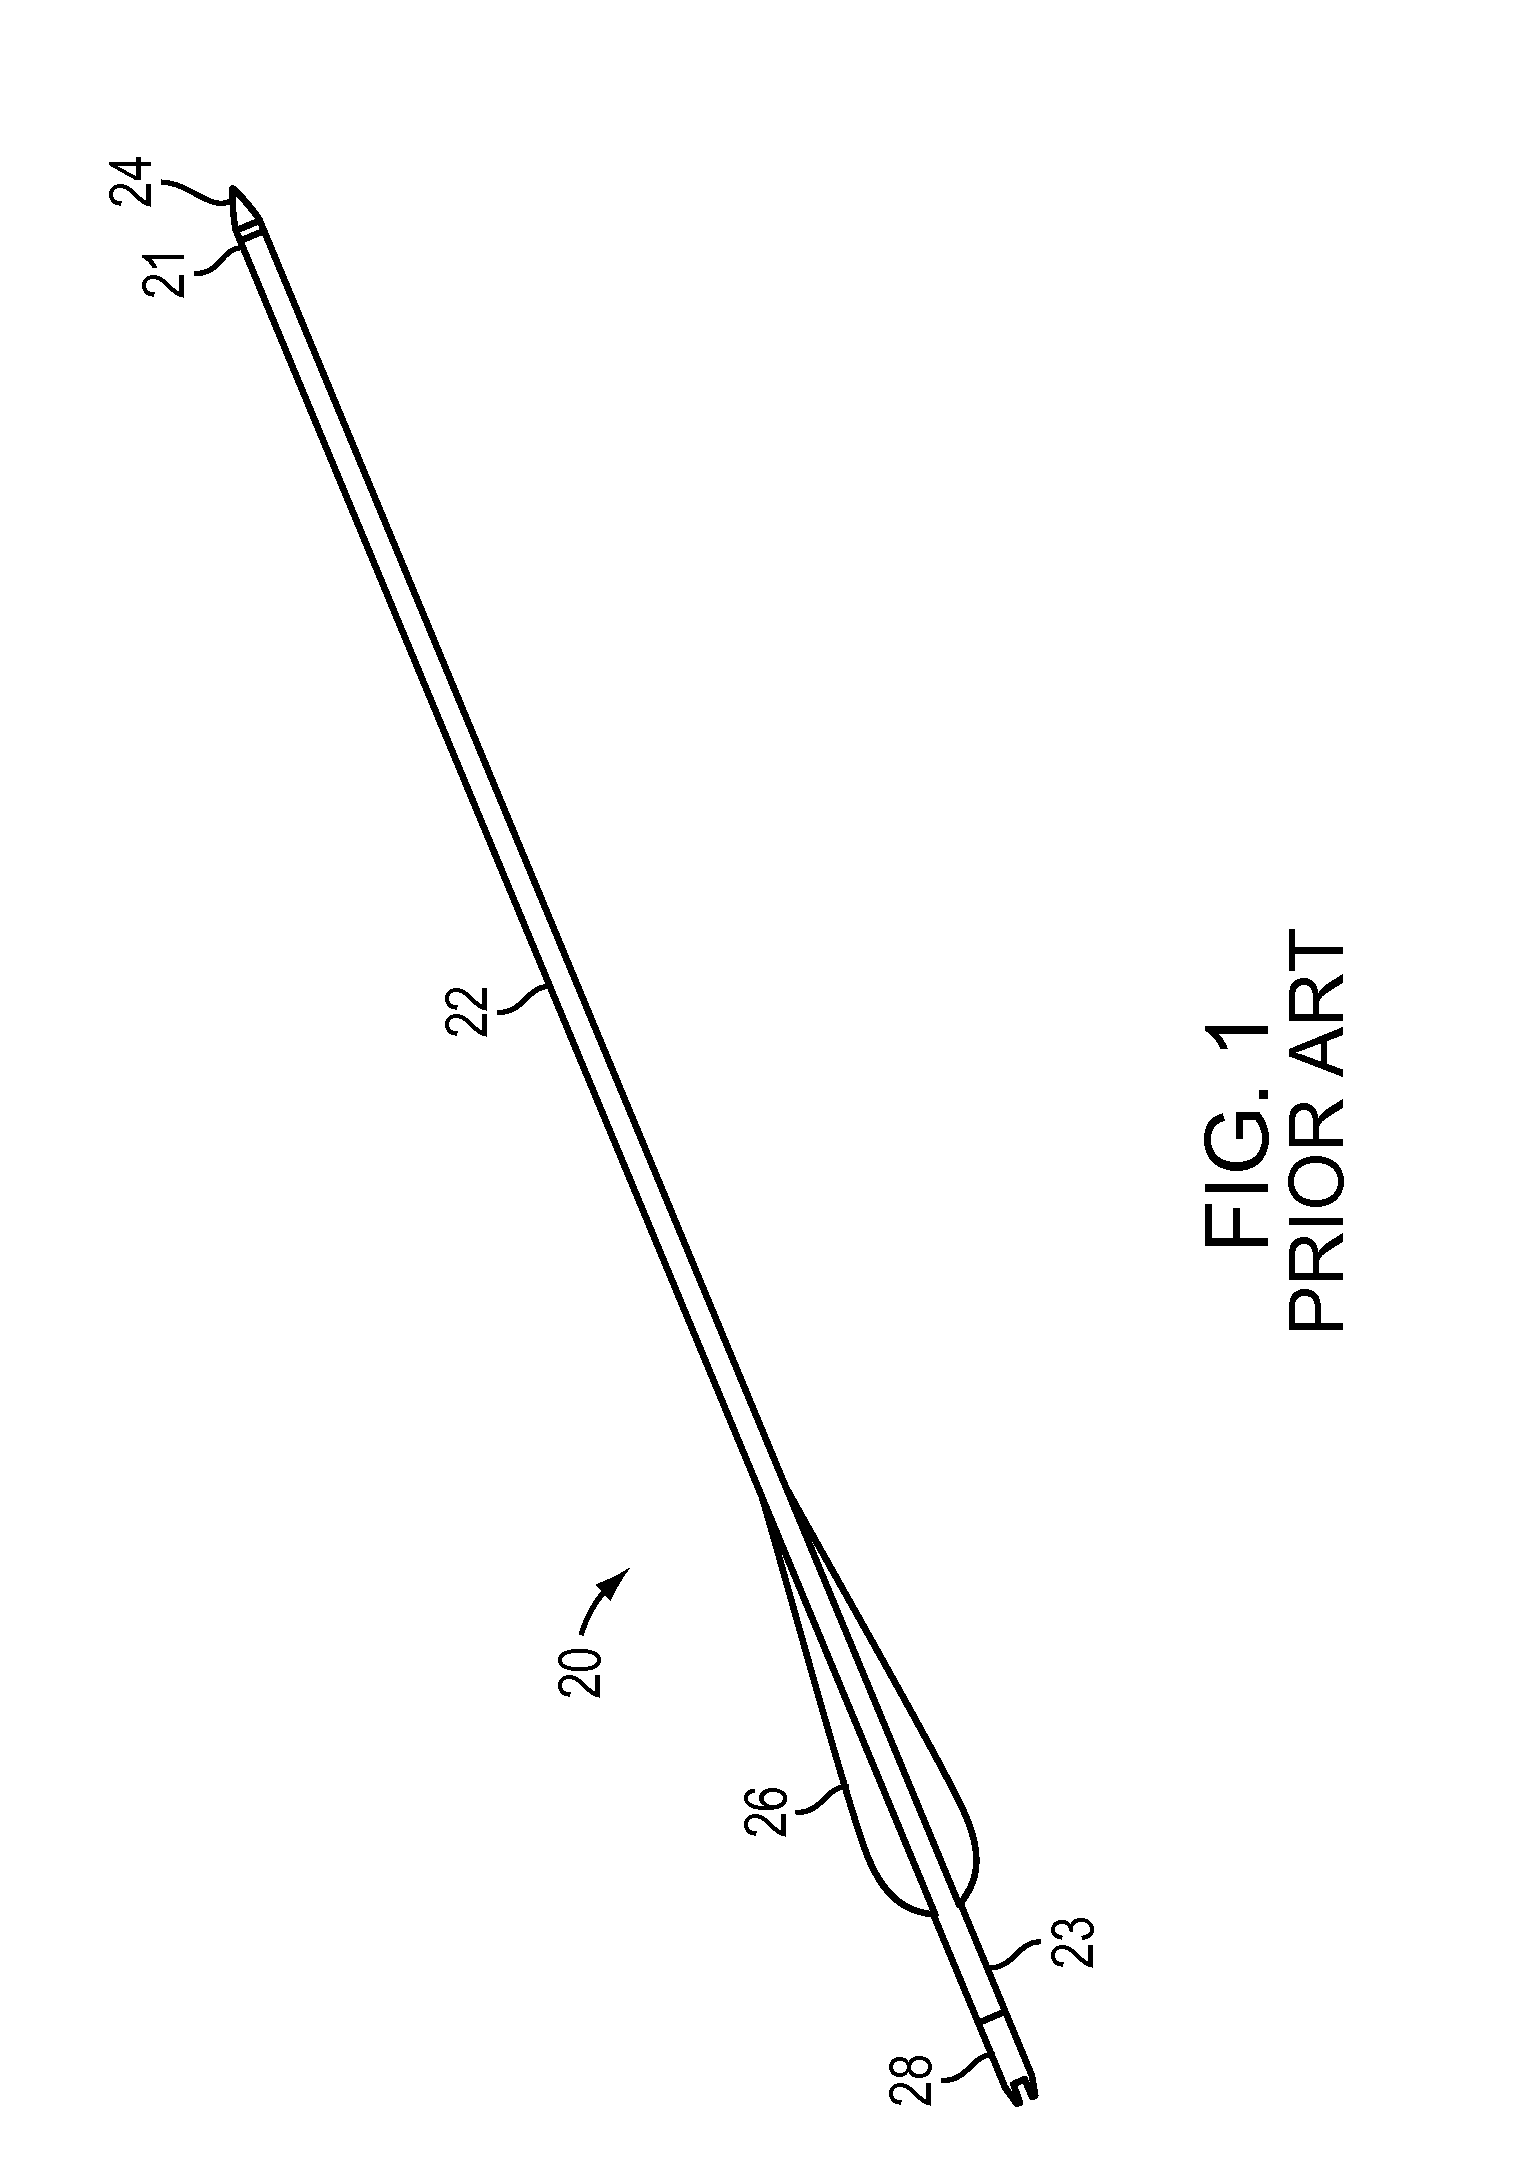 Systems and methods for archery equipment